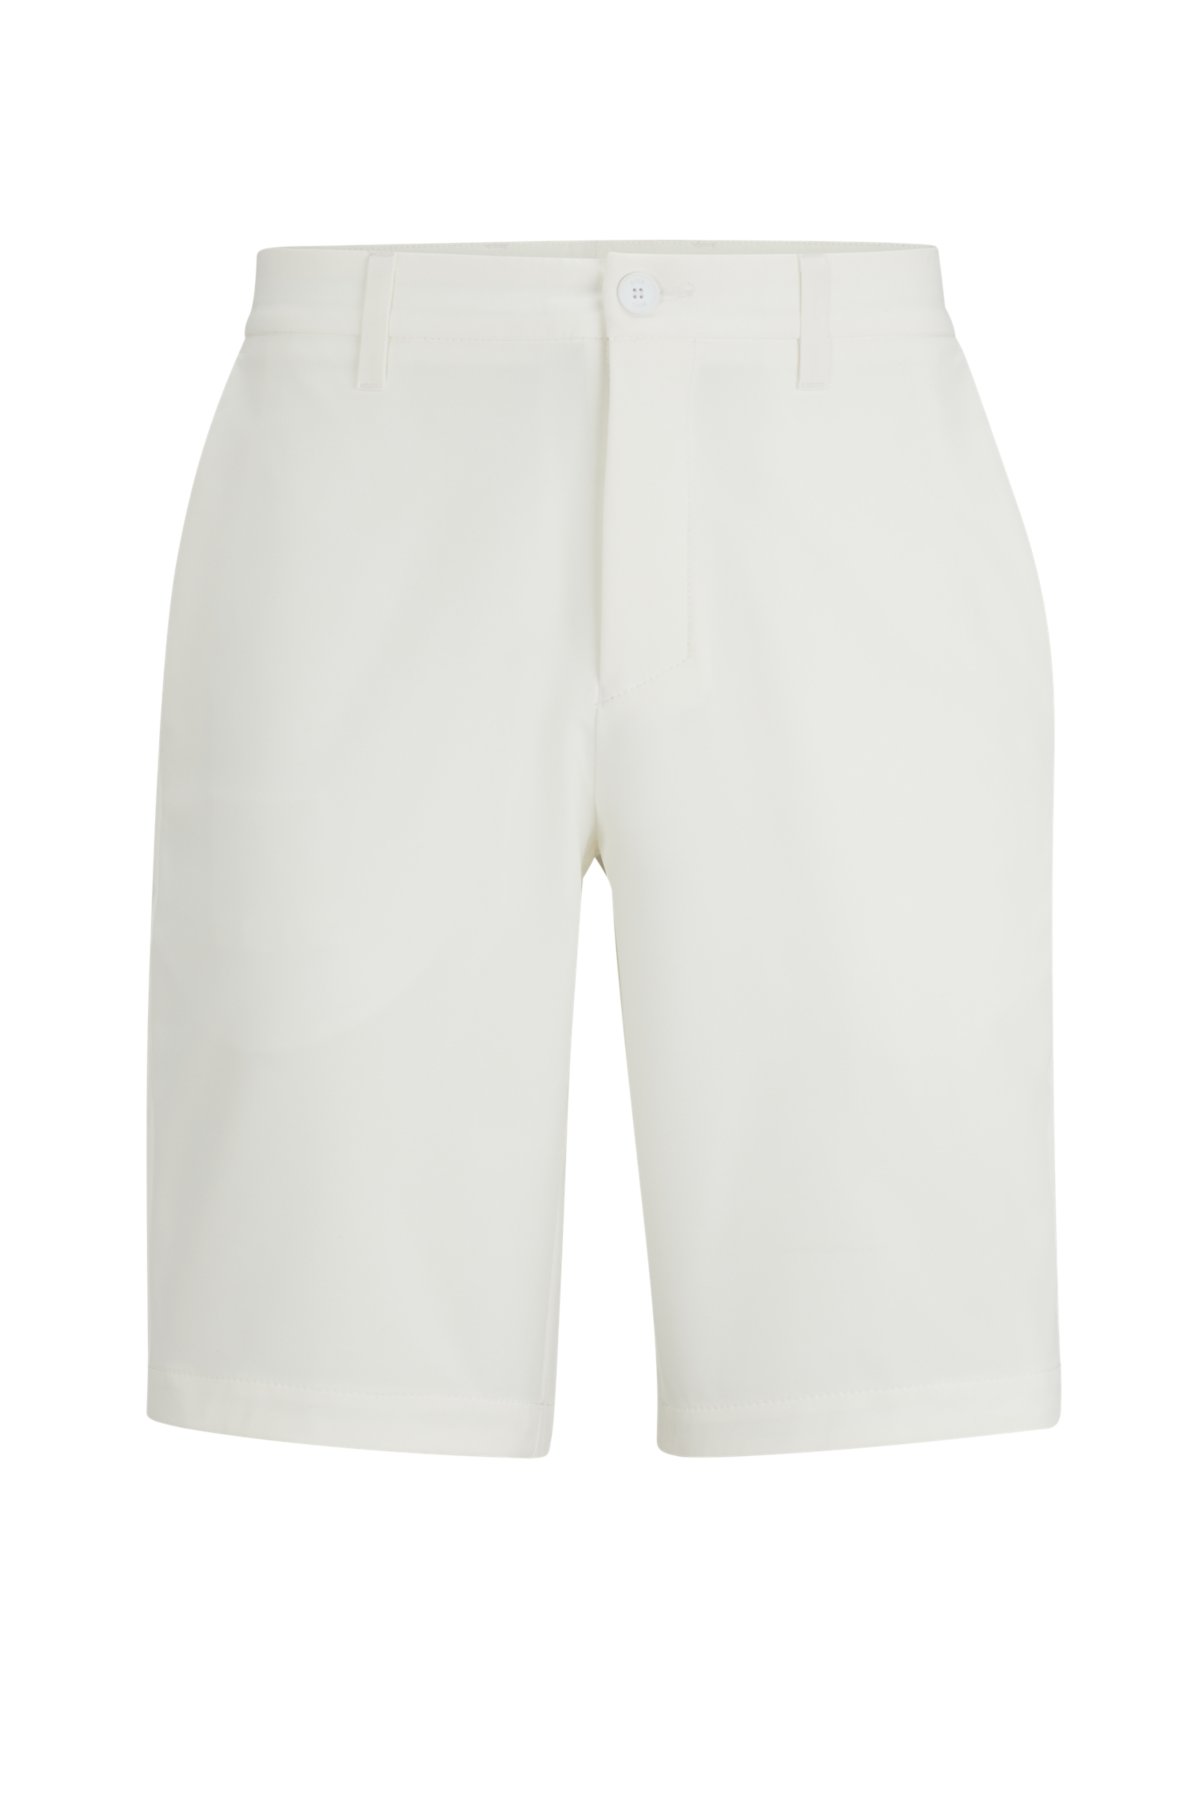 Slim-fit shorts in easy-iron four-way stretch fabric, White